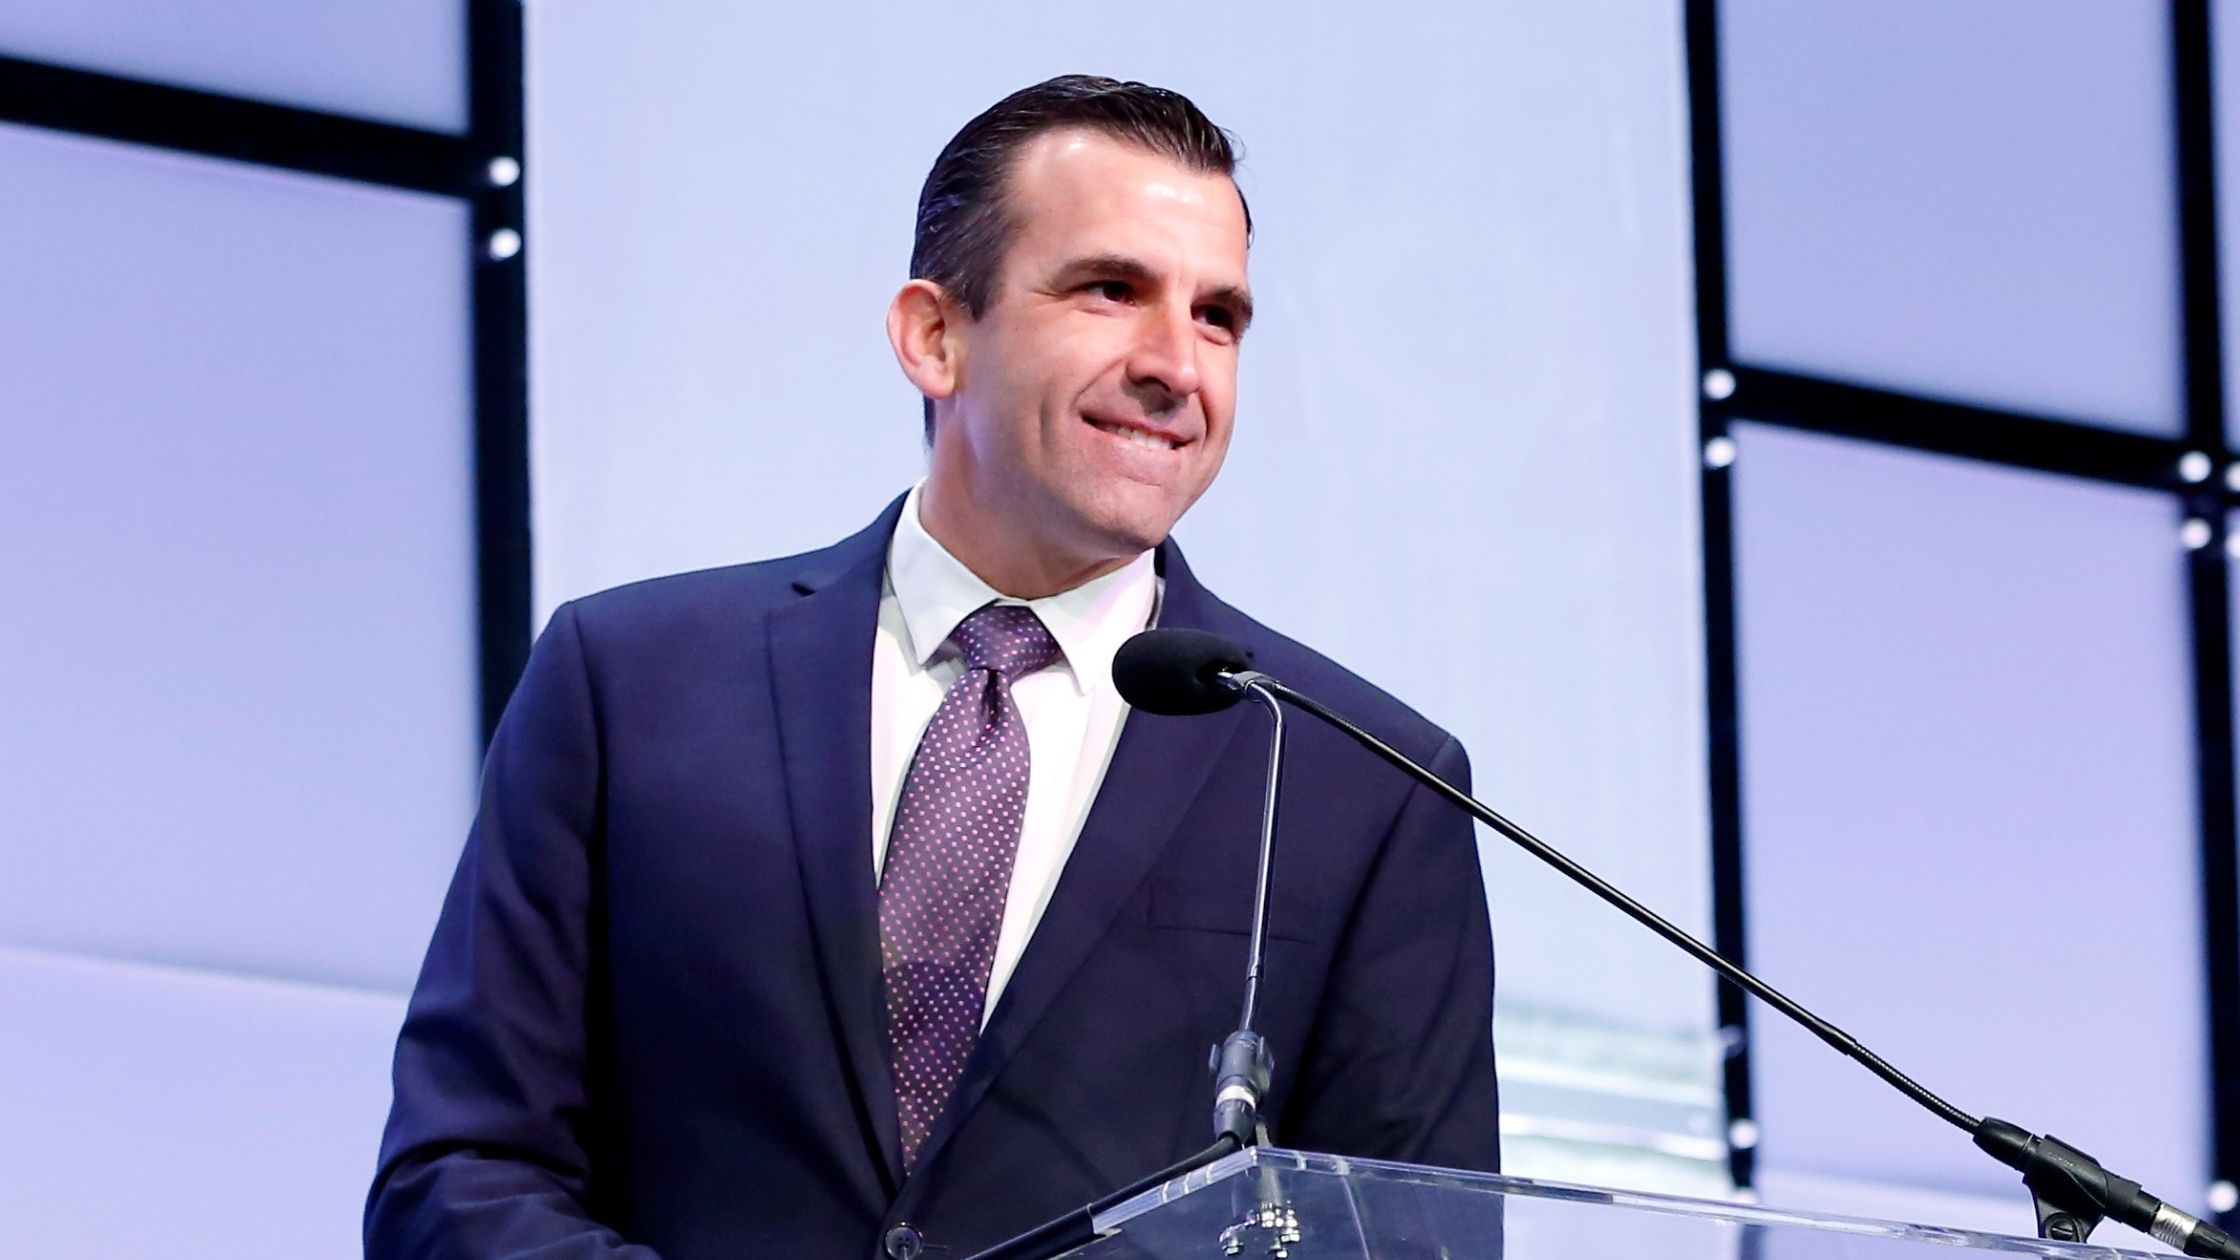 Mayor of San Jose, Sam Liccardo speaks onstage at the Watermark Conference for Women 2018 at San Jose Convention Center on February 23, 2018, in San Jose, California.